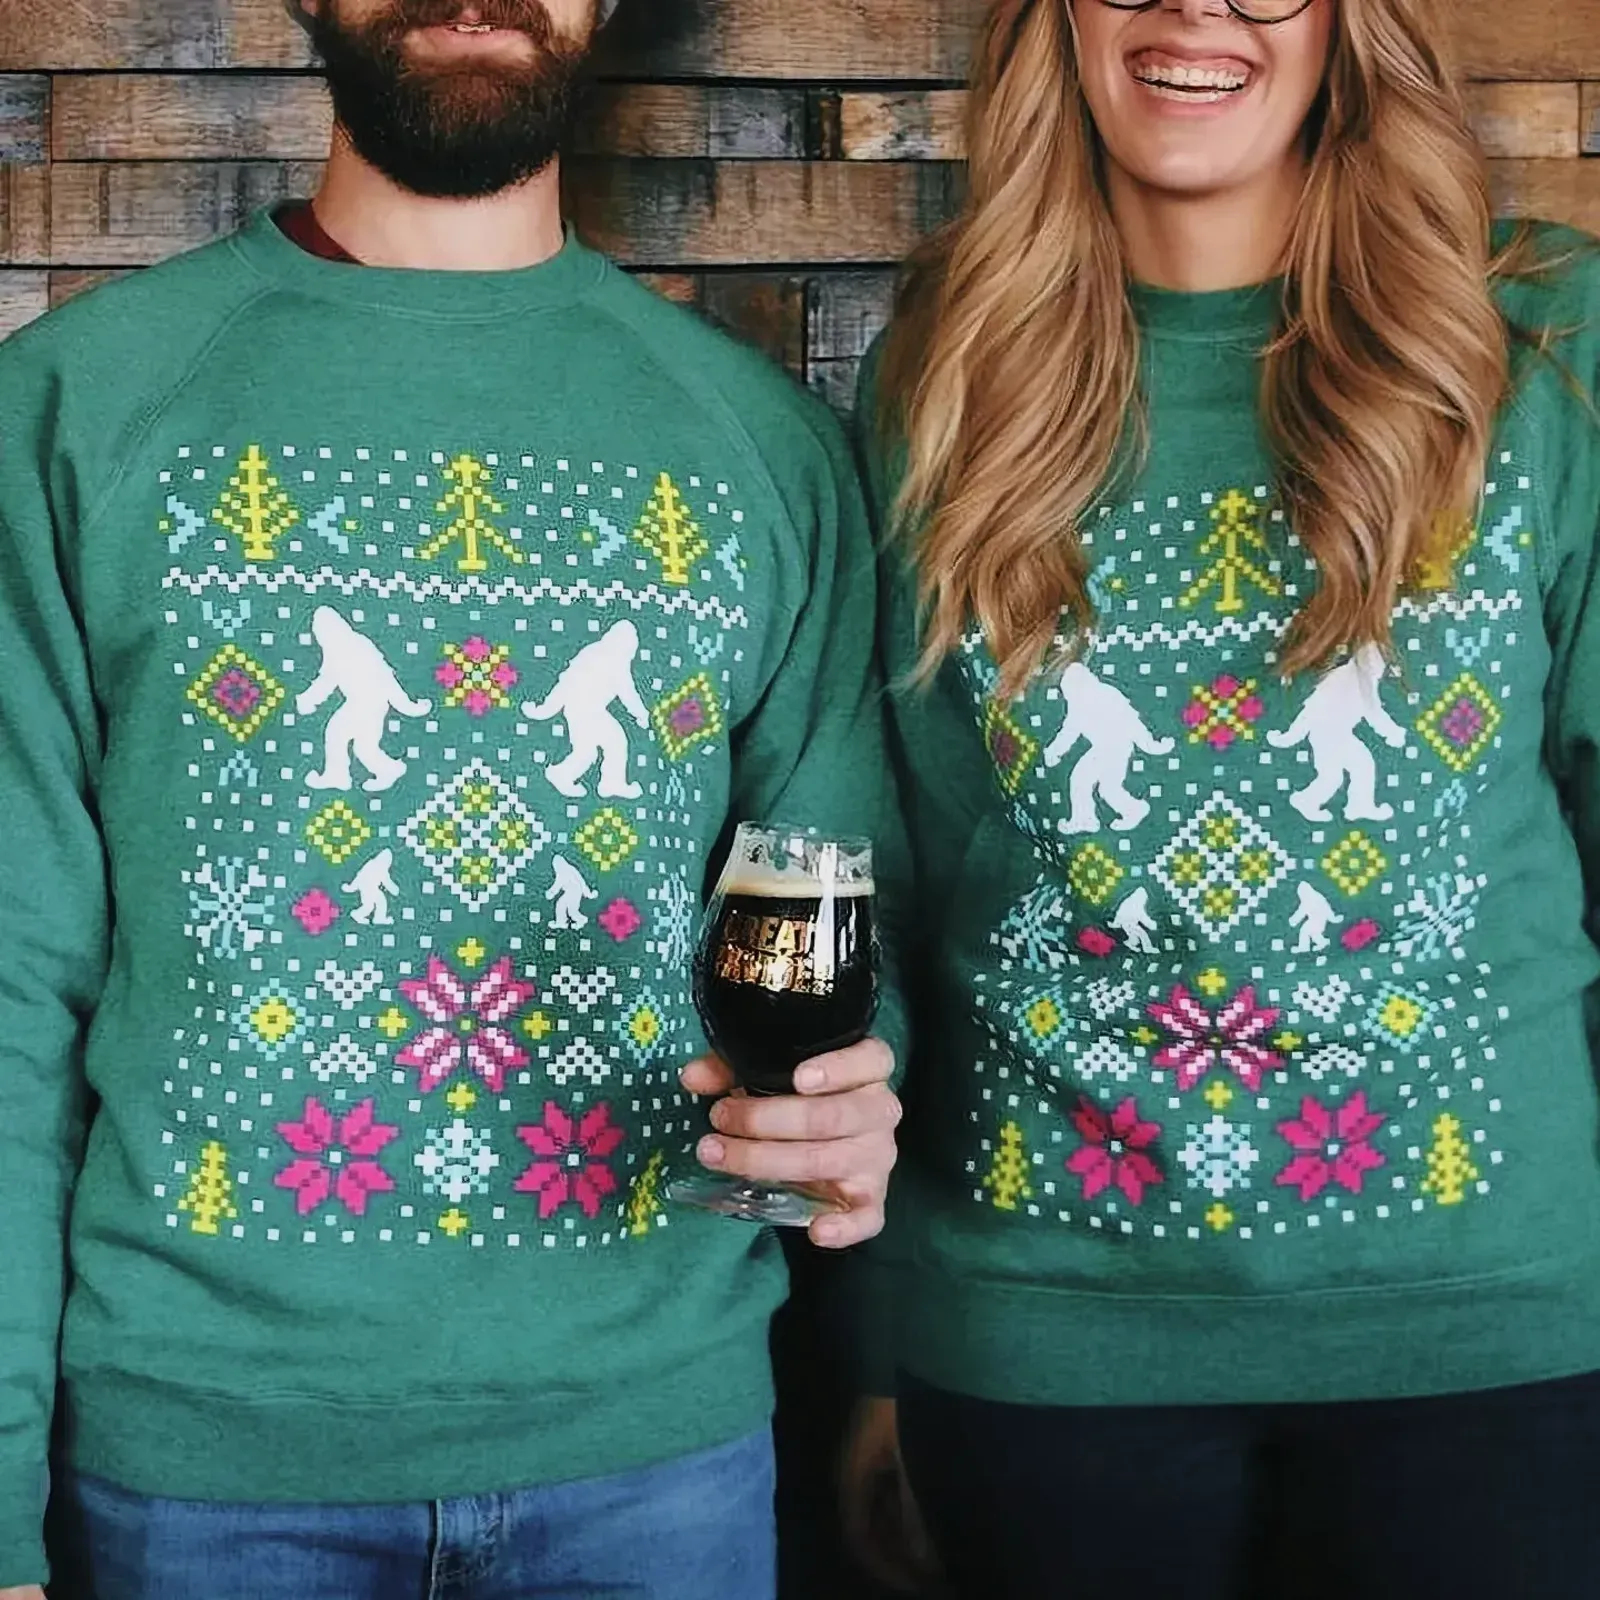 A couple wearing green sweaters smiling and holding glasses of beer.